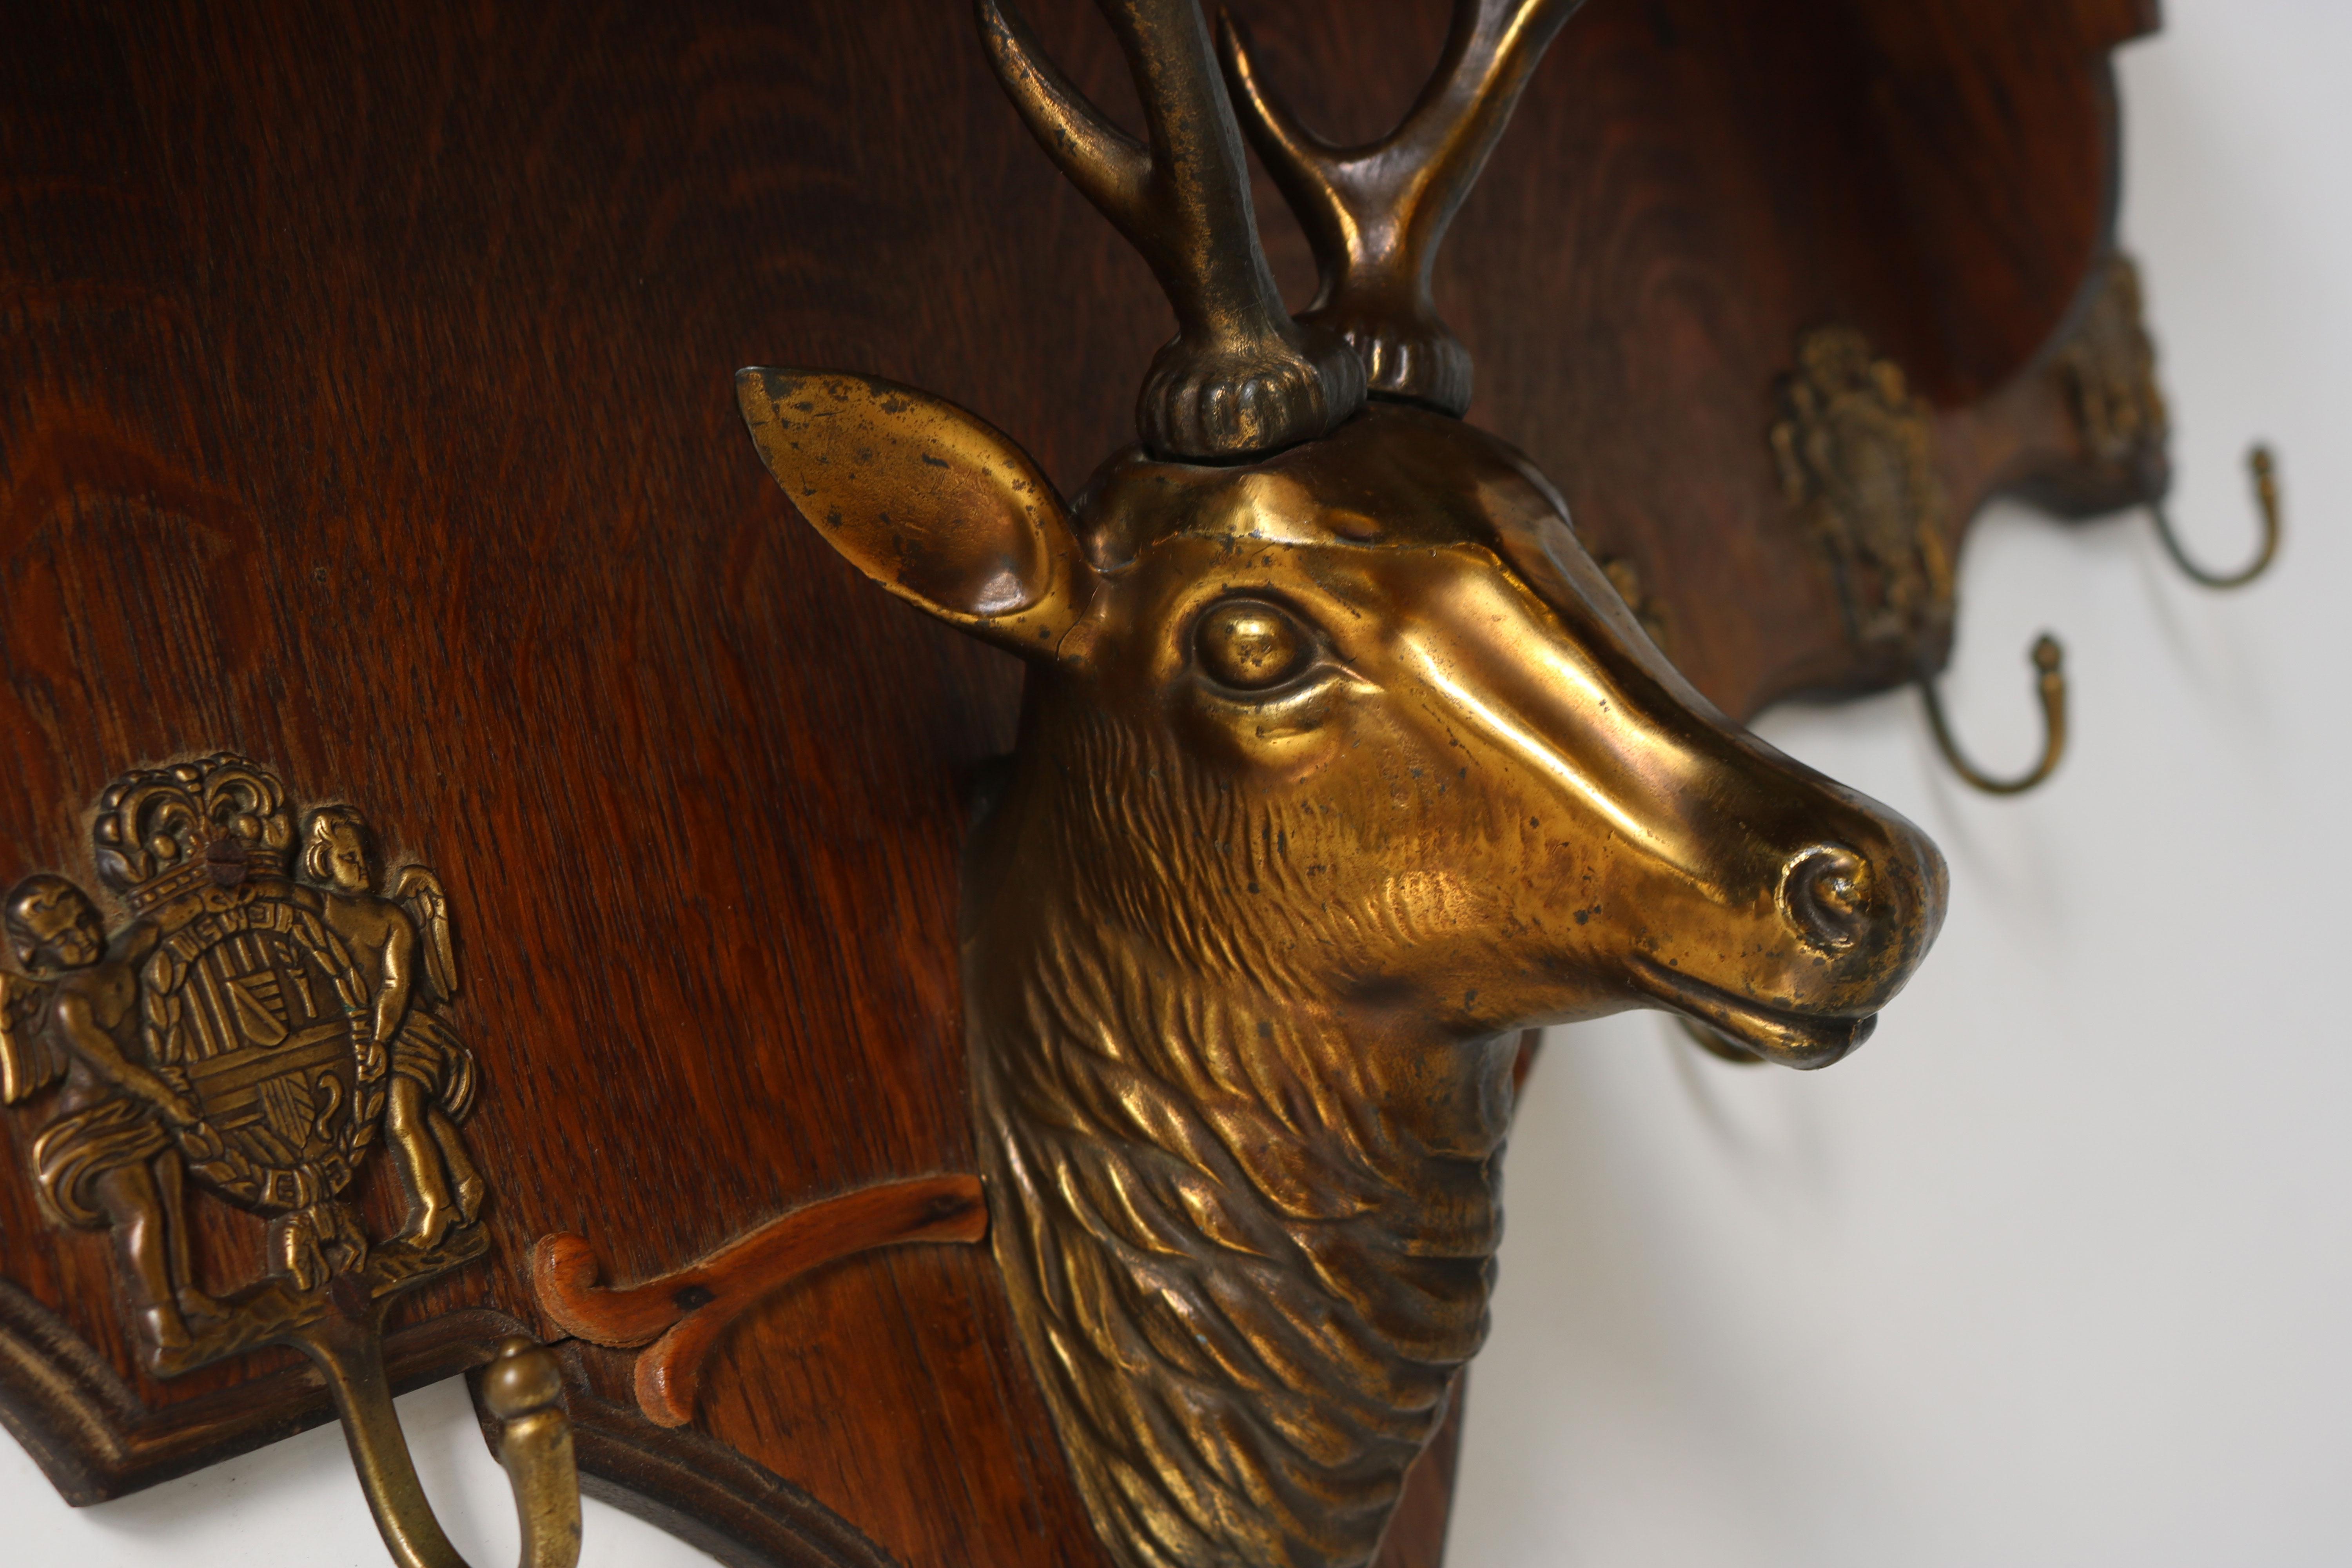 Gorgeous & unique antique coat rack from France 1940's. 
The coatrack has a large brass deer head that uses his antlers to support the hat rack. 
The coat rack is made out of oak and has 6 nicely decorated original hooks. 
It is in nice antique